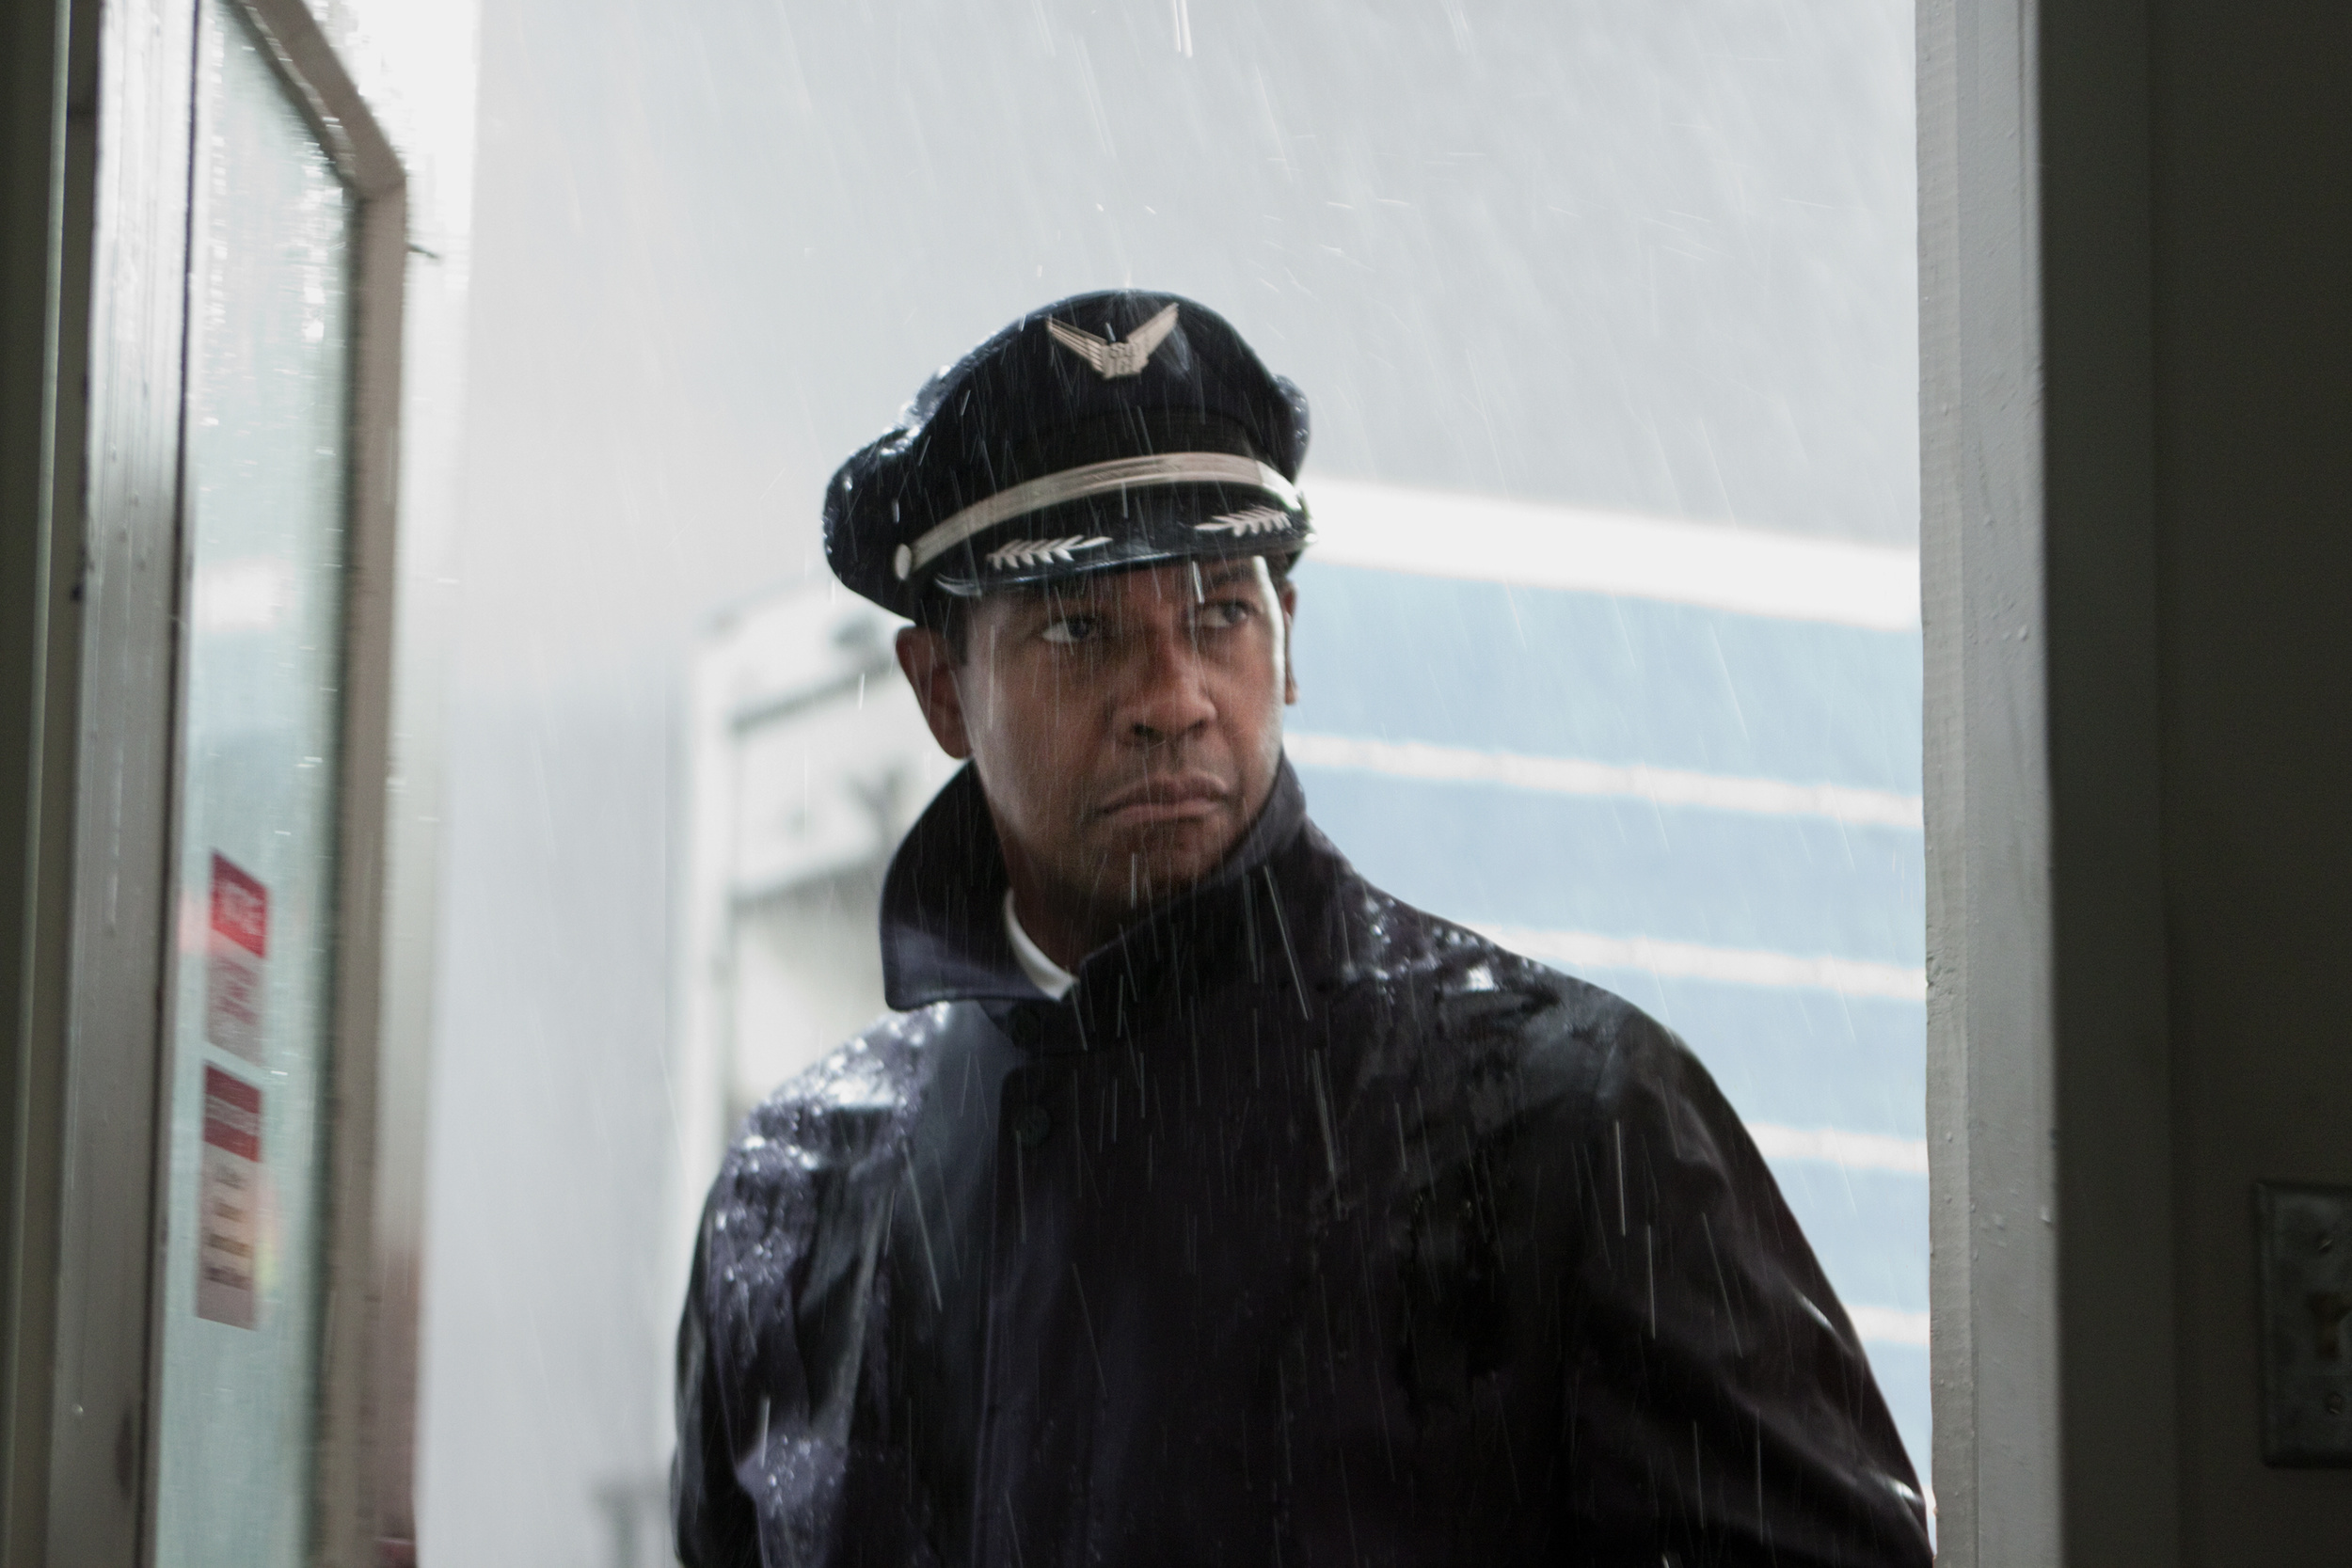 <p>What if a pilot was a hero, but also perhaps a danger to himself and others? That’s the dilemma at the center of “Flight,” a film directed by Robert Zemeckis and starring Denzel Washington. It’s Washington who plays the pilot who manages to pull off an incredible flying feat, in spite of the fact he regularly abuses alcohol and drugs.</p><p>You may also like: <a href='https://www.yardbarker.com/entertainment/articles/the_greatest_music_producers_of_all_time_031924/s1__37736788'>The greatest music producers of all time</a></p>